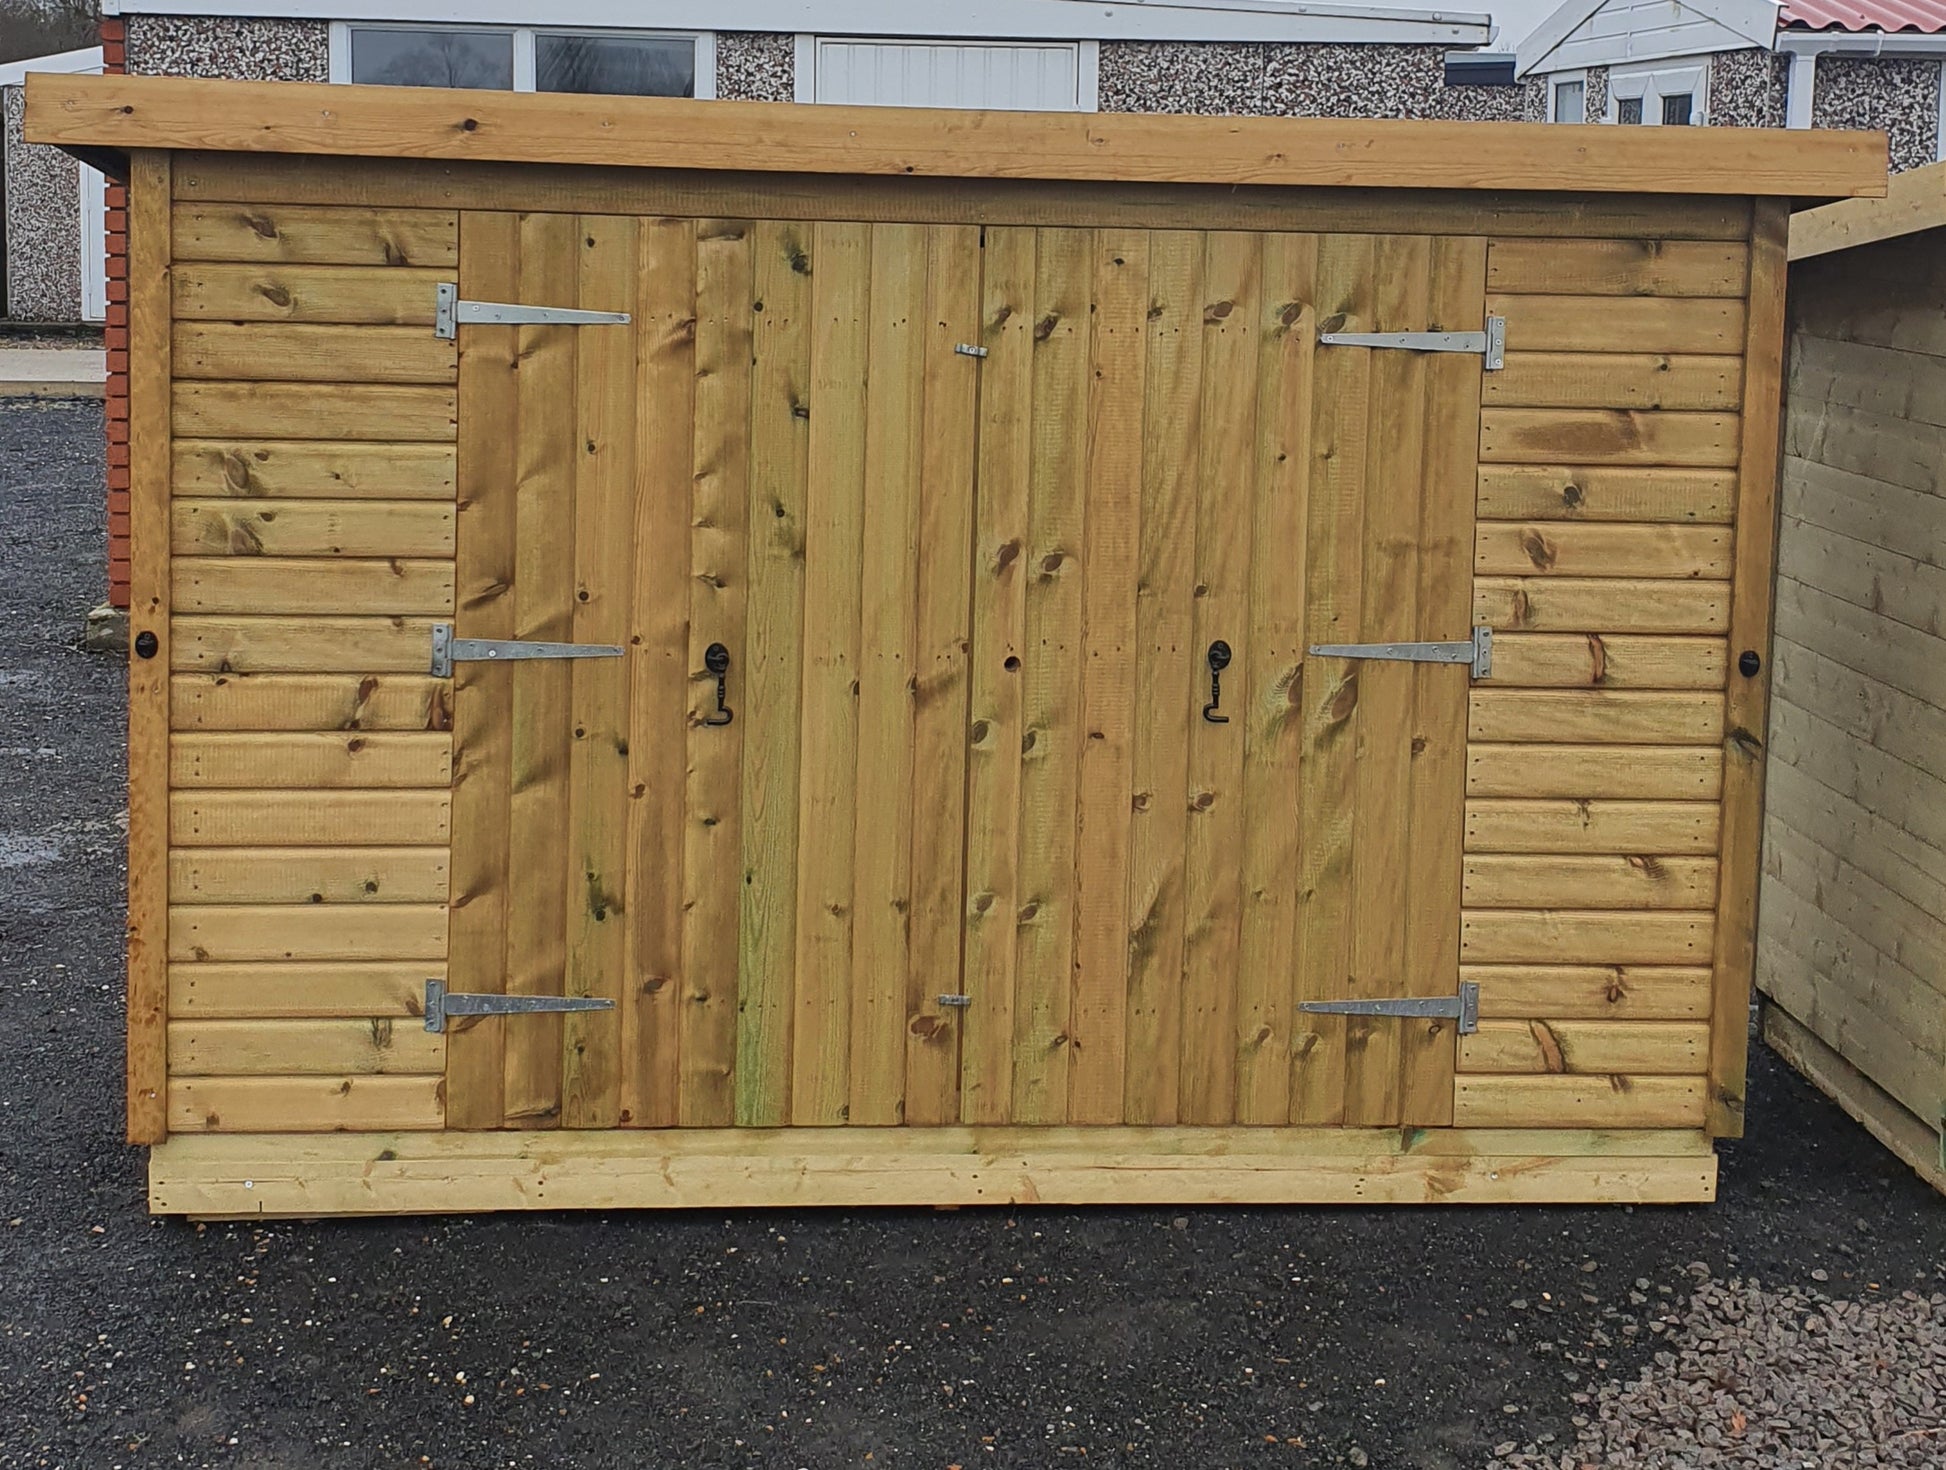 Tanalised Tool Store Keighley Timber & Fencing sheds www.keighleytimbersheds.co.uk